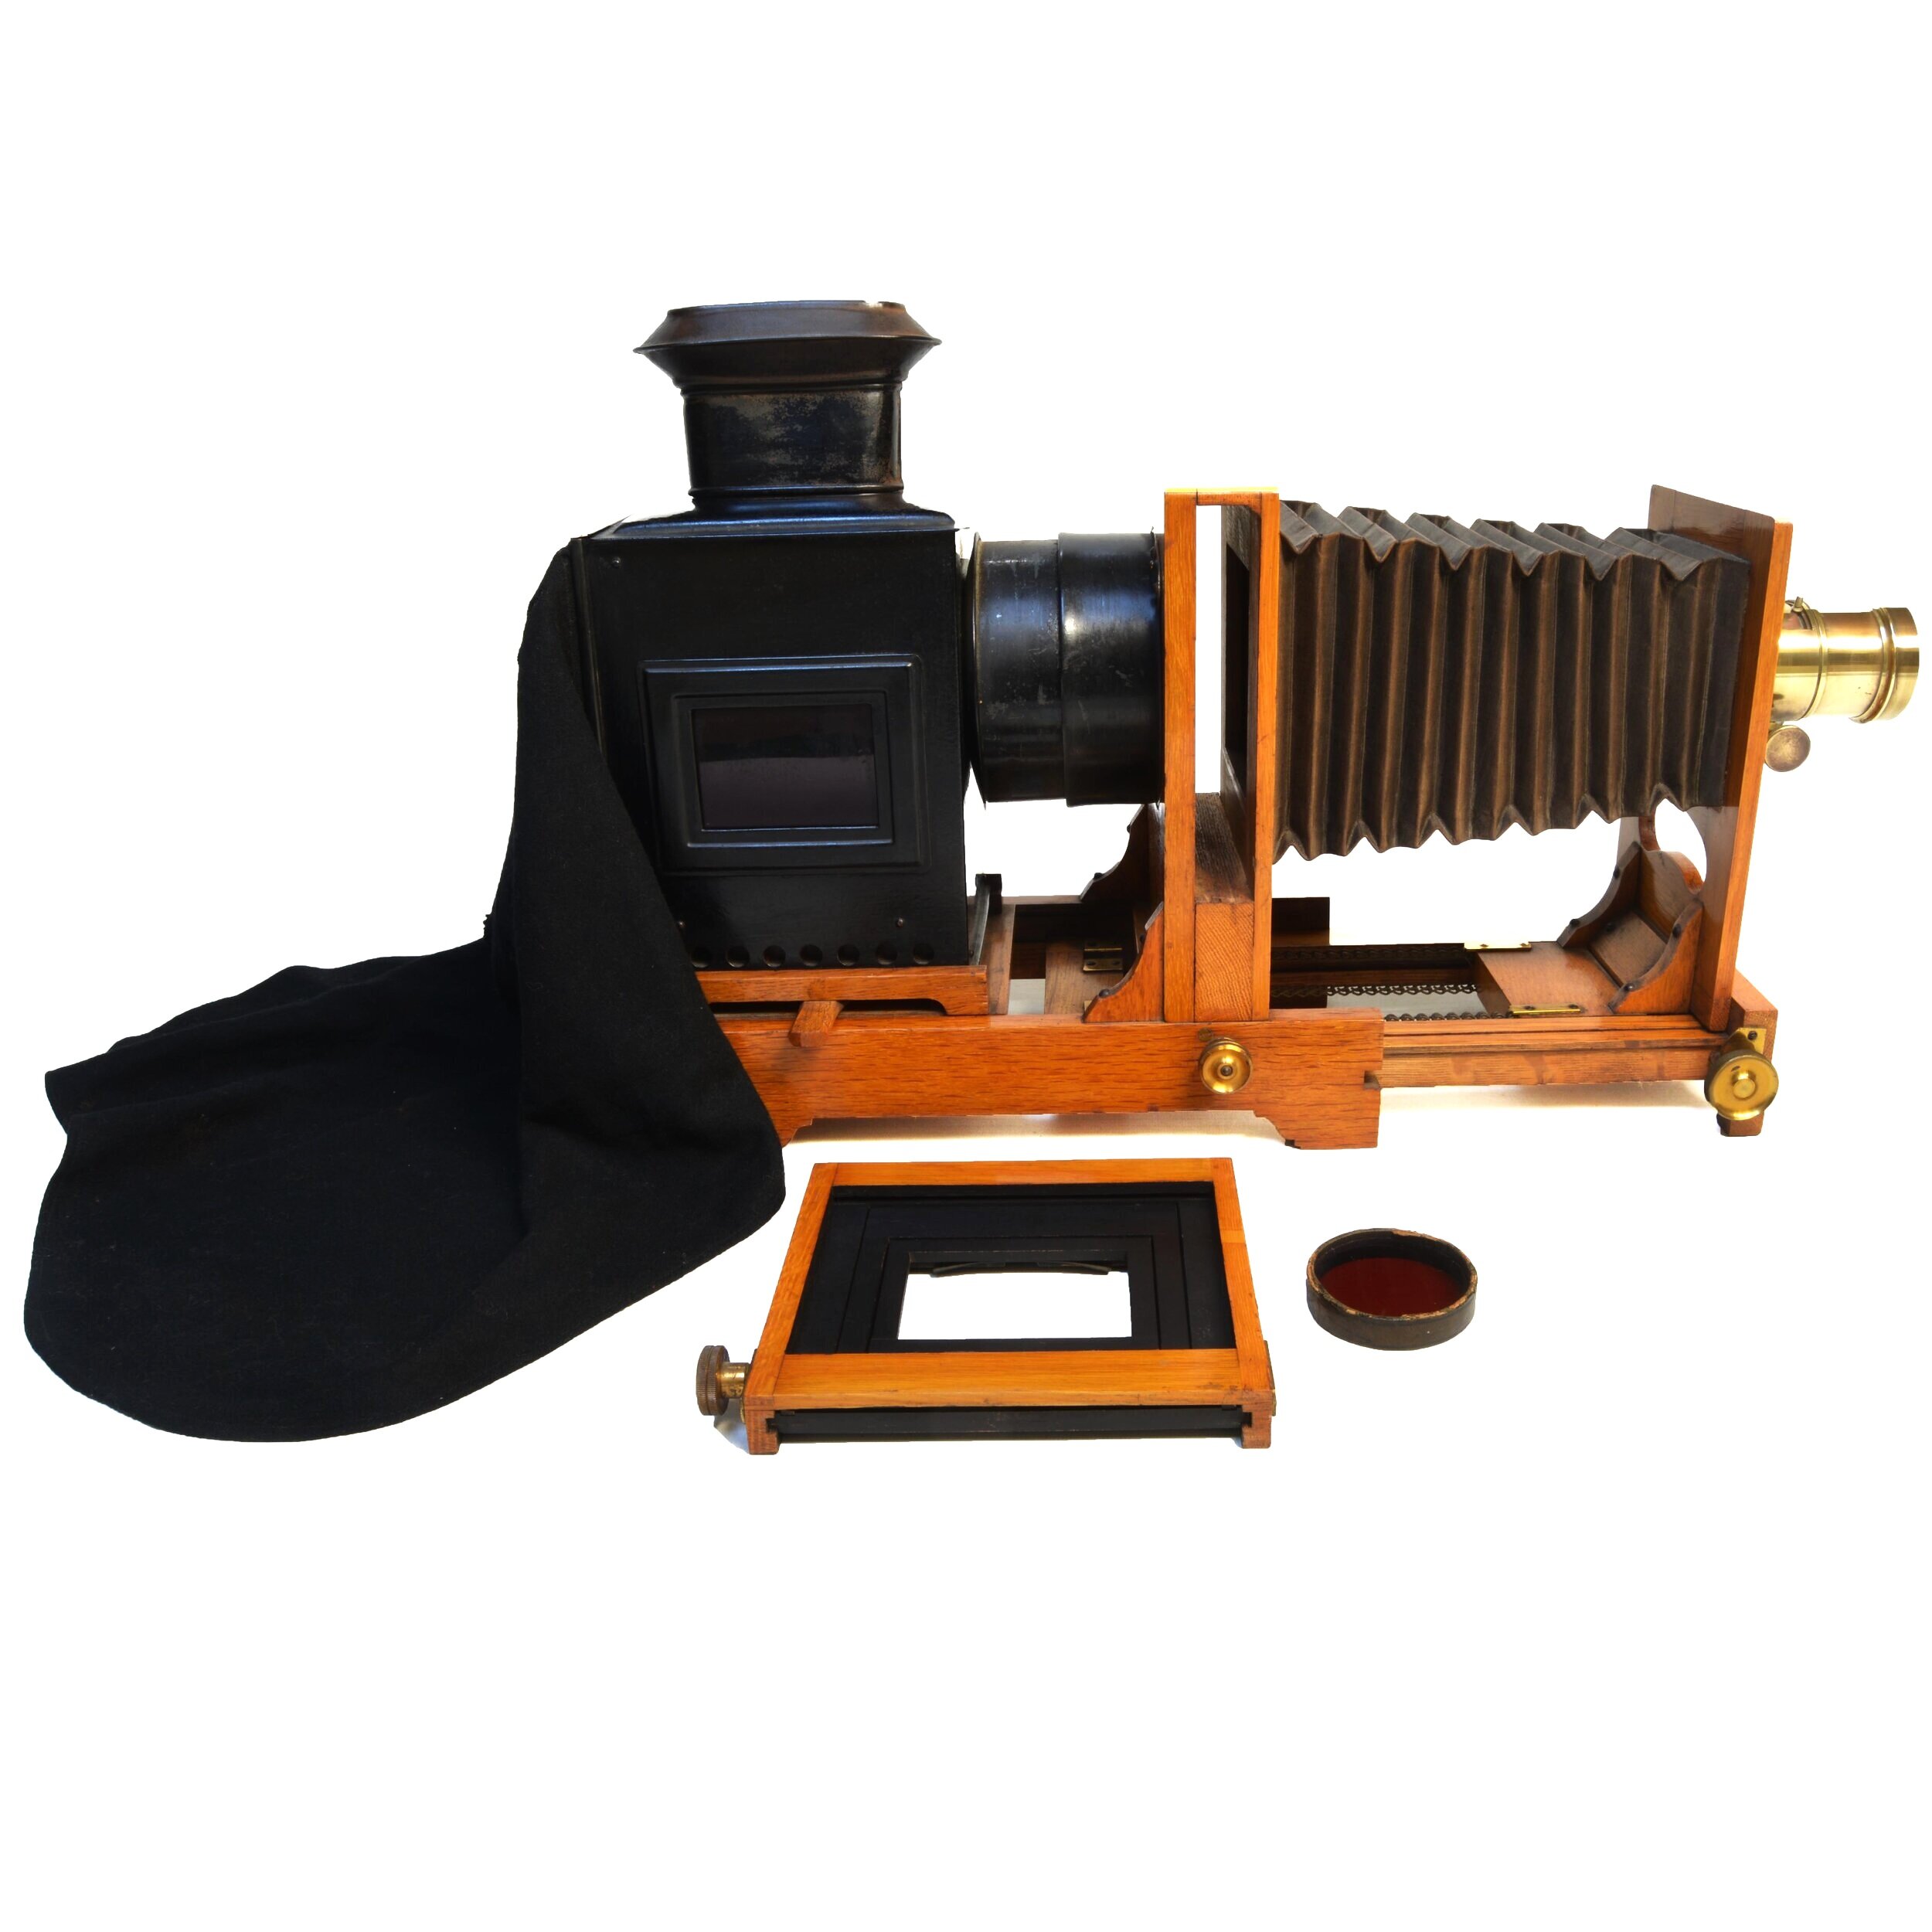 Butcher and Sons 'Coronet' Horizontal Enlarger